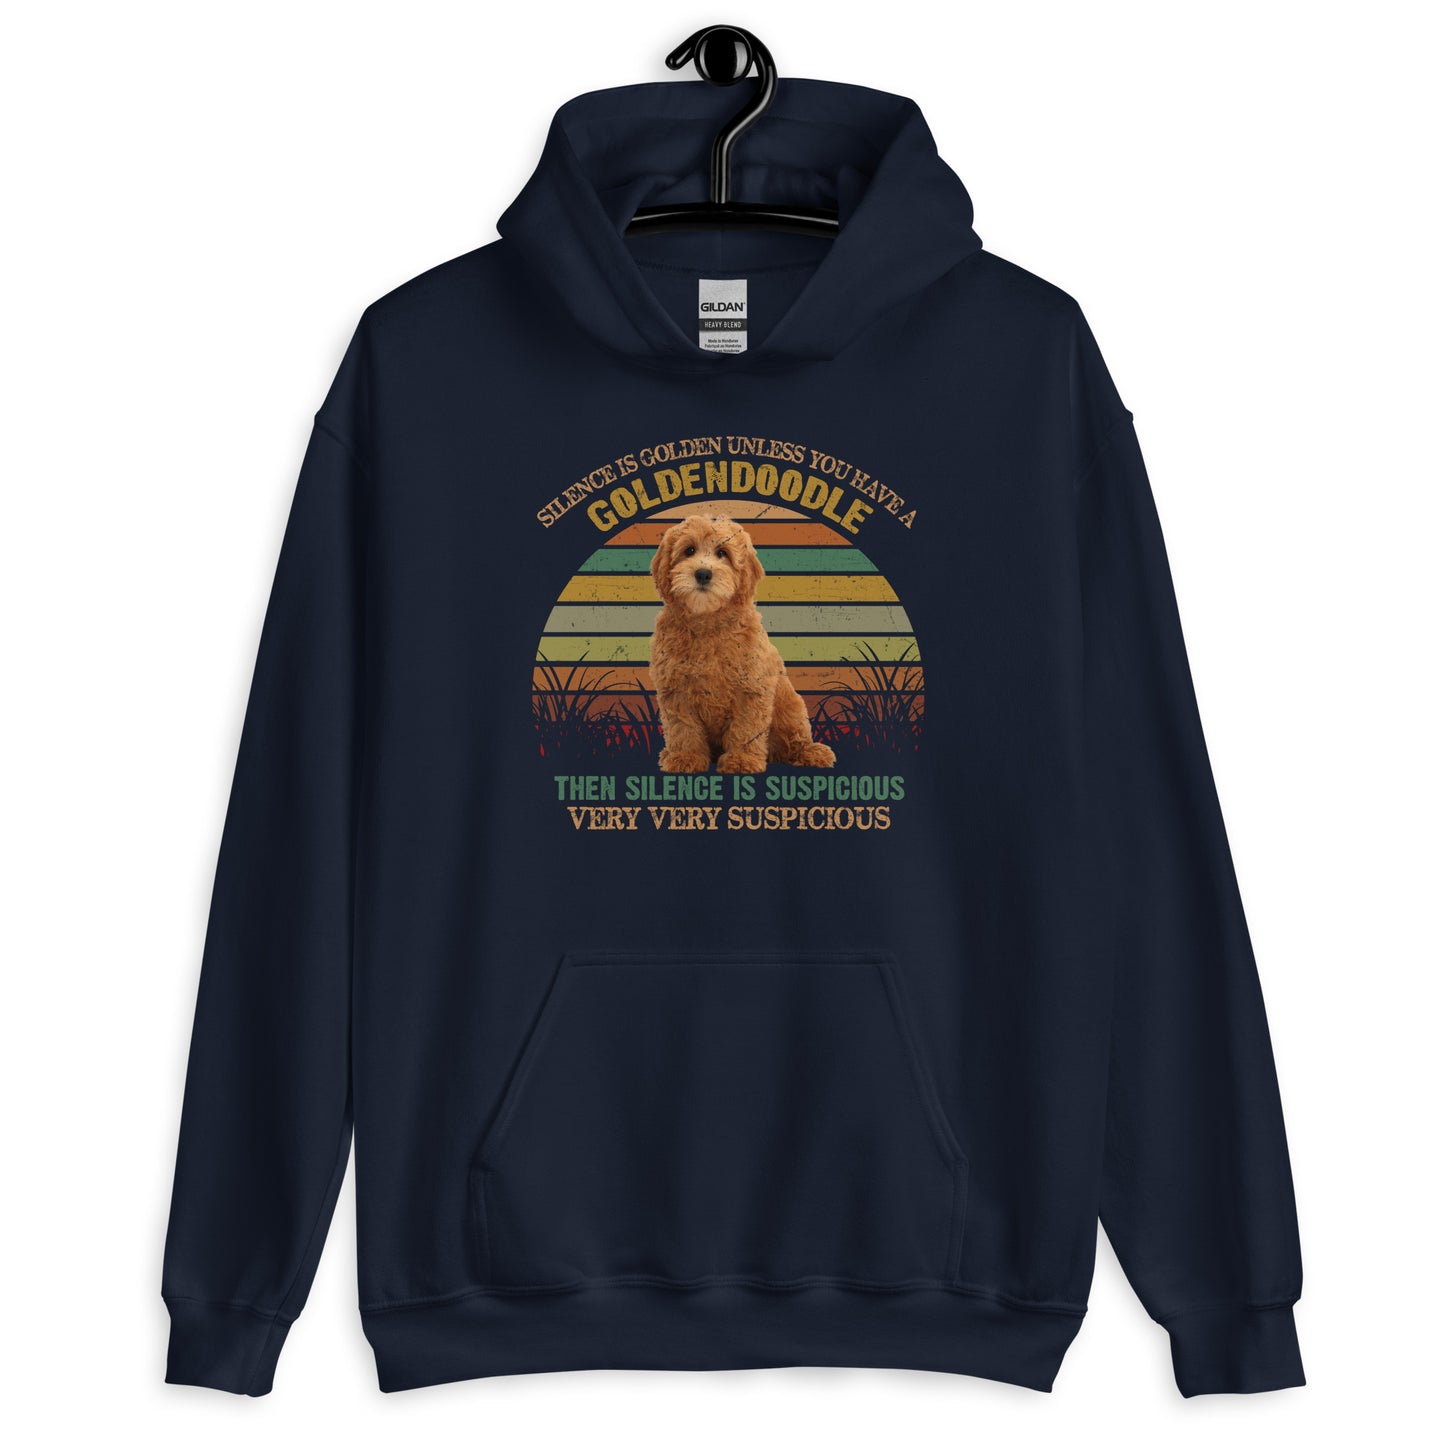 Silence is Golden Unless You Have a Goldendoodle Hoodie